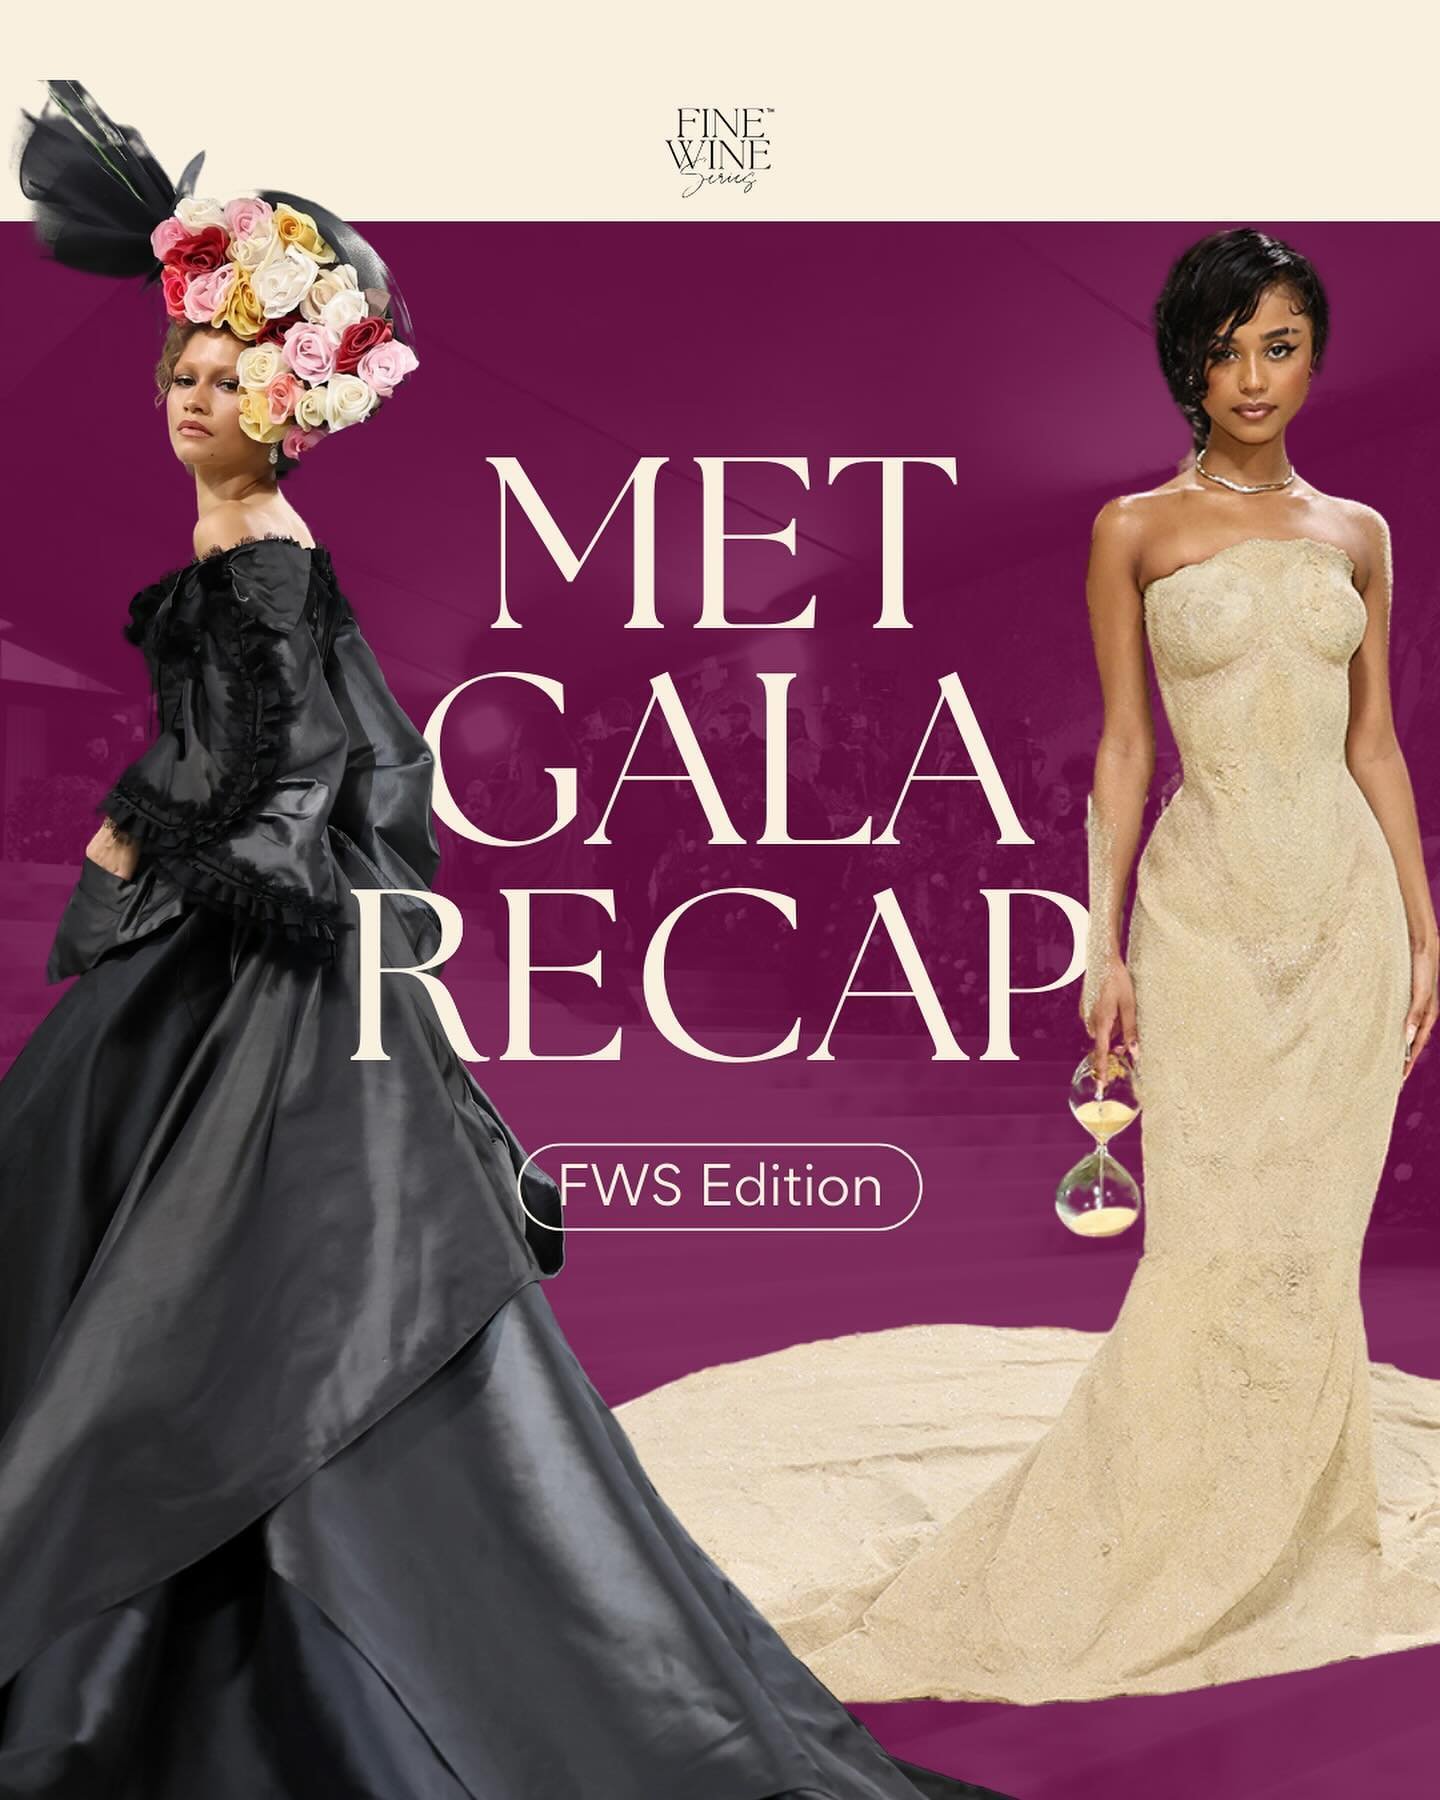 This year&rsquo;s Met Gala theme was &ldquo;Sleeping Beauties: Reawakening Fashion&rdquo; and the official dress code was &lsquo;The Garden of Time.&rsquo; How do ya&rsquo;ll think the celebrities did? Were we loving the looks or think we can do bett